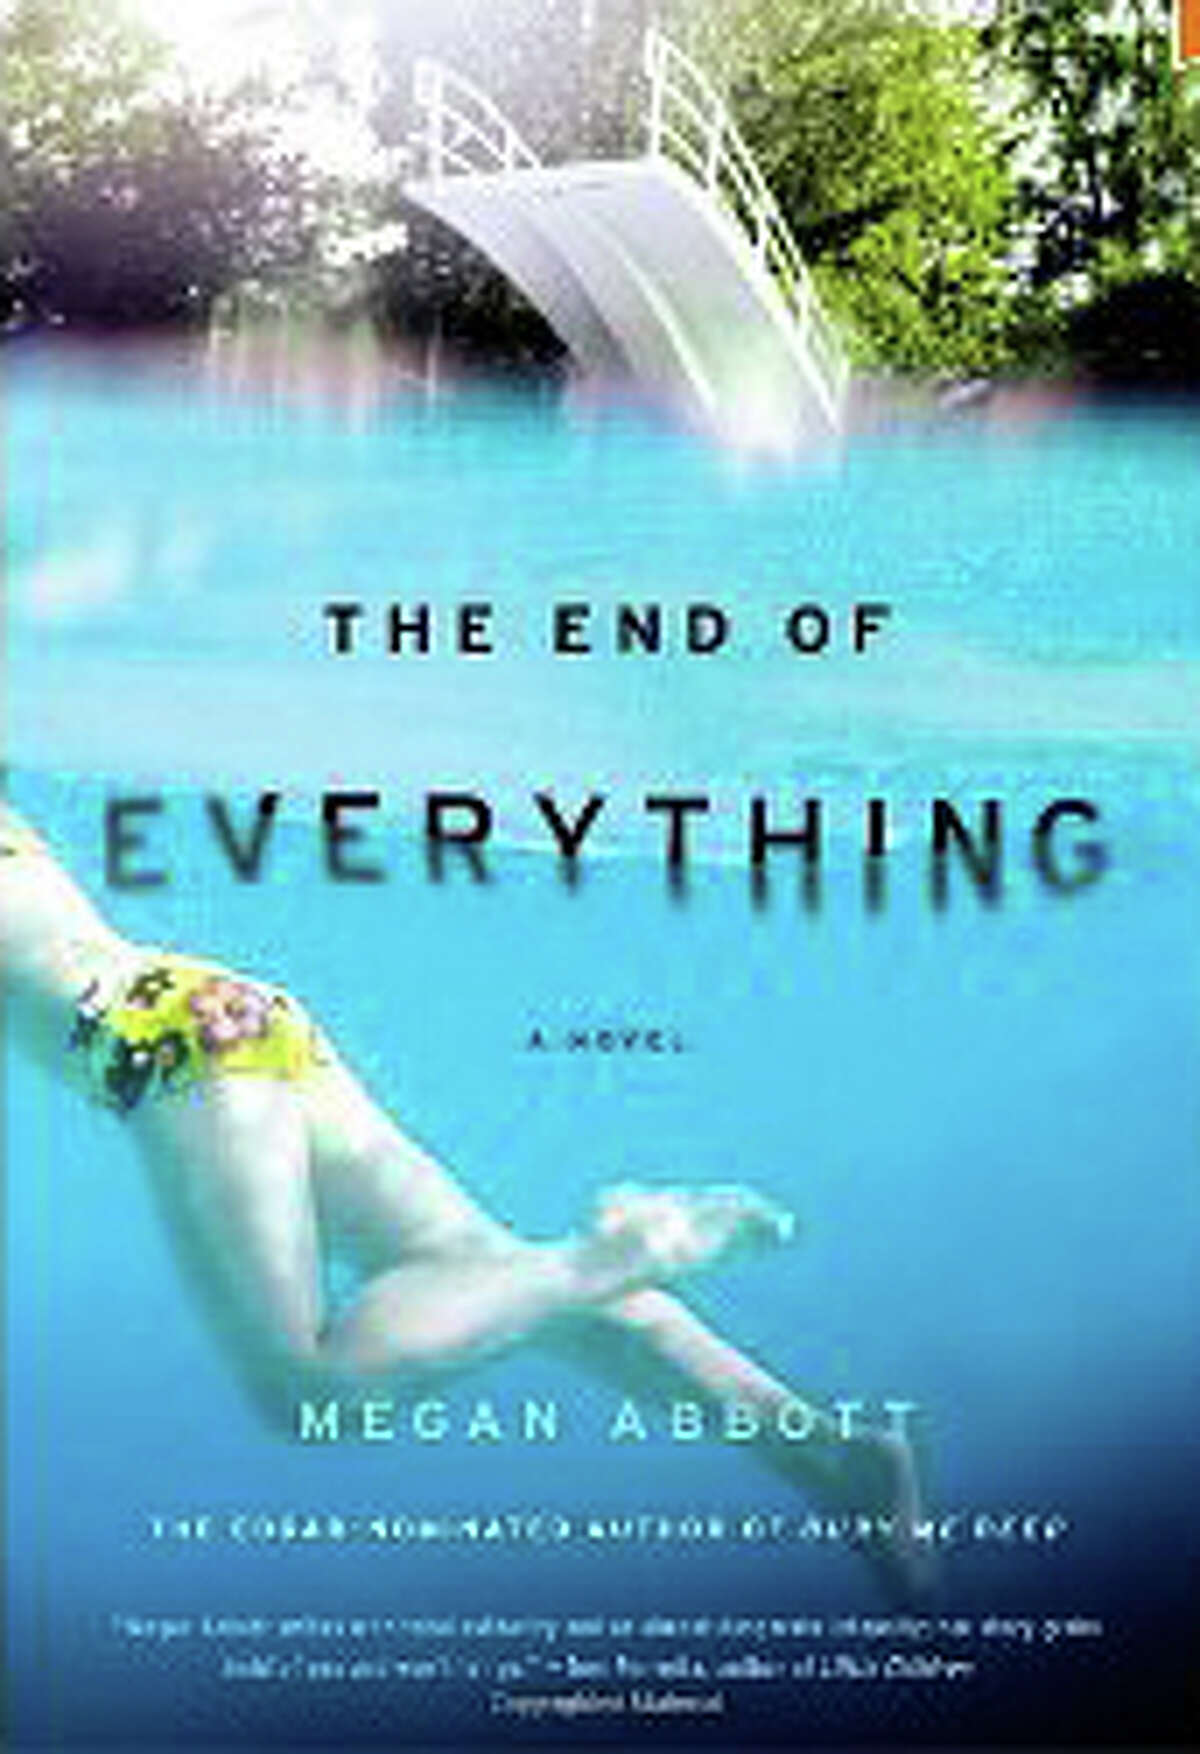 "The End of Everything" is a recommended read.